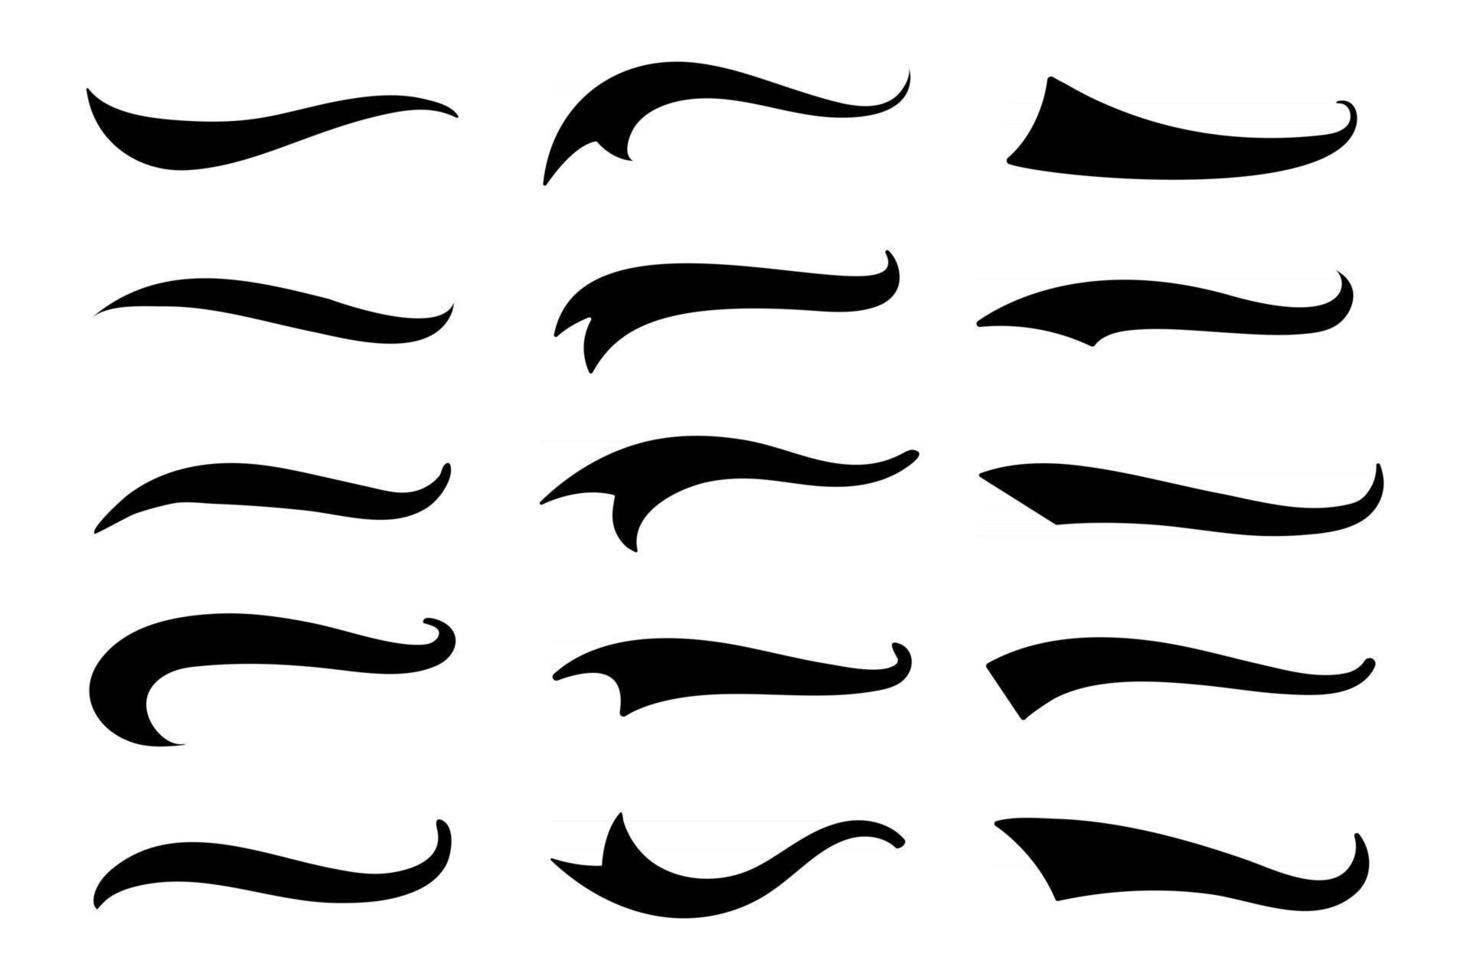 text tail. The tail of the sports text. to decorate the end of the font. vector